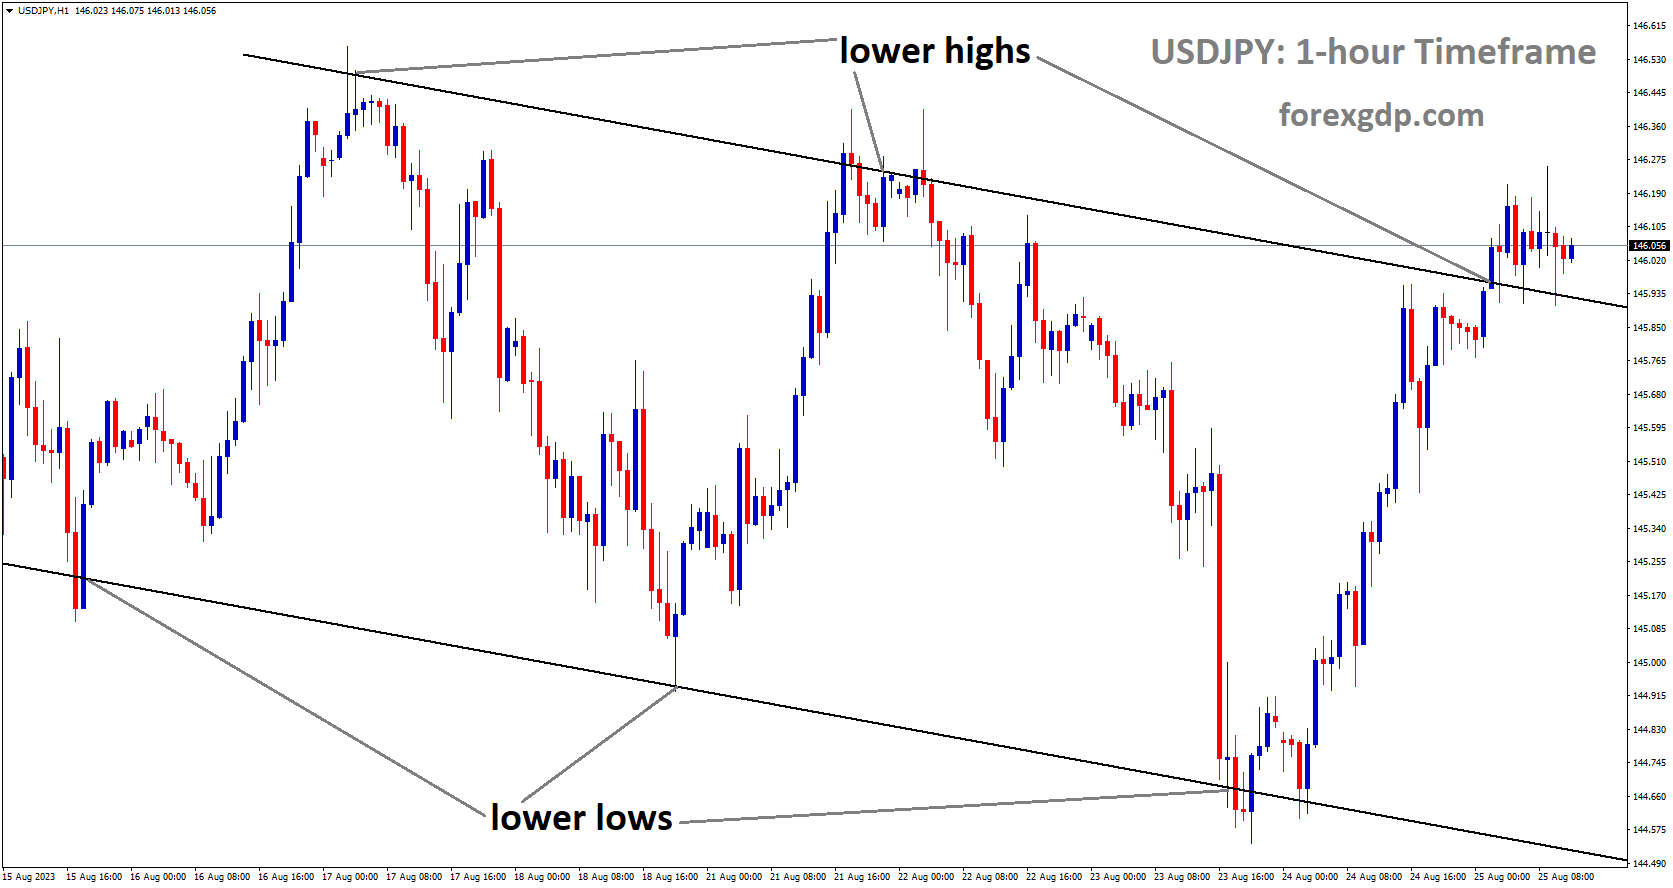 USDJPY is moving in Descending channel and market has reached lower high area of the channel.